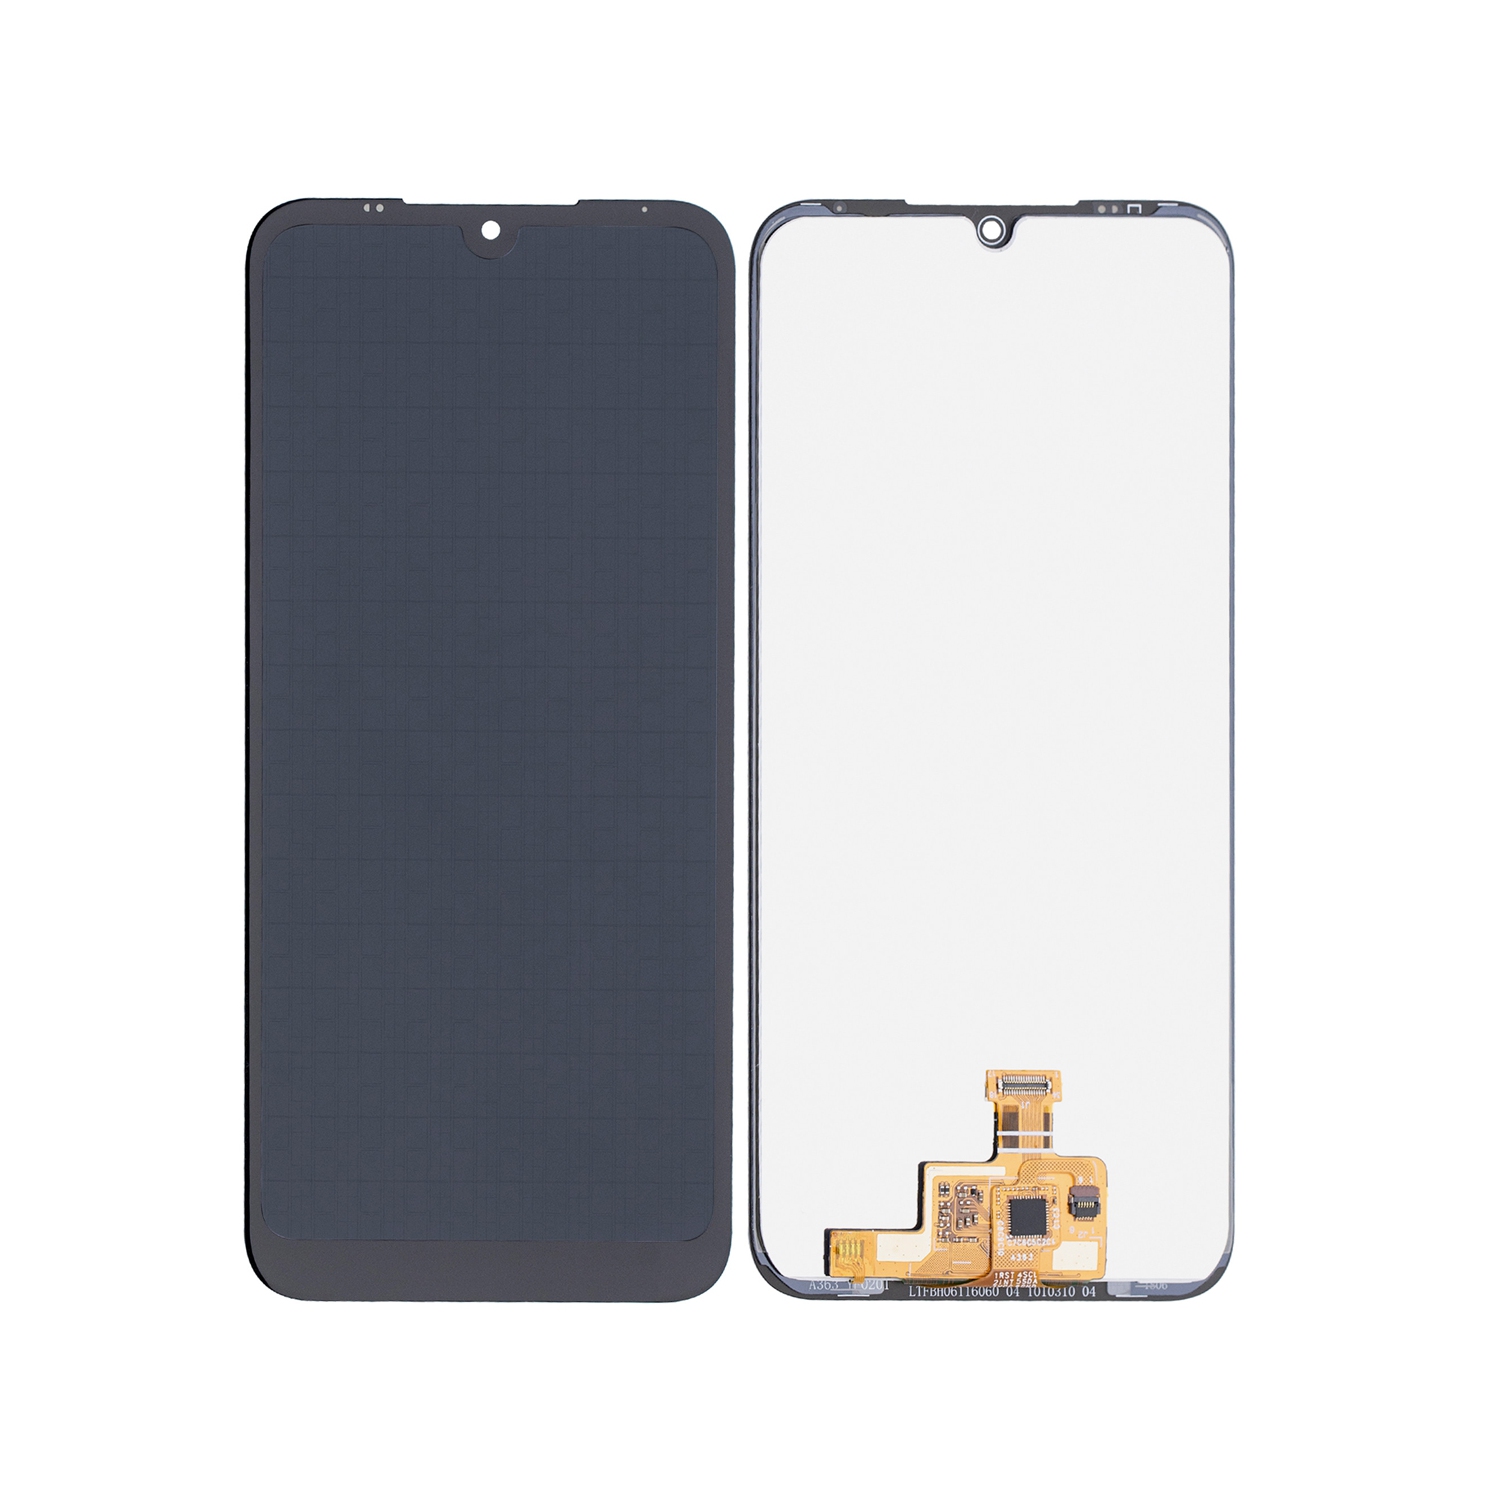 Refurbished (Excellent) - LCD Touch Screen Digitizer Assembly For LG Premier Pro Plus / Harmony 4 Expression Plus 3 / LG K41 (K400)